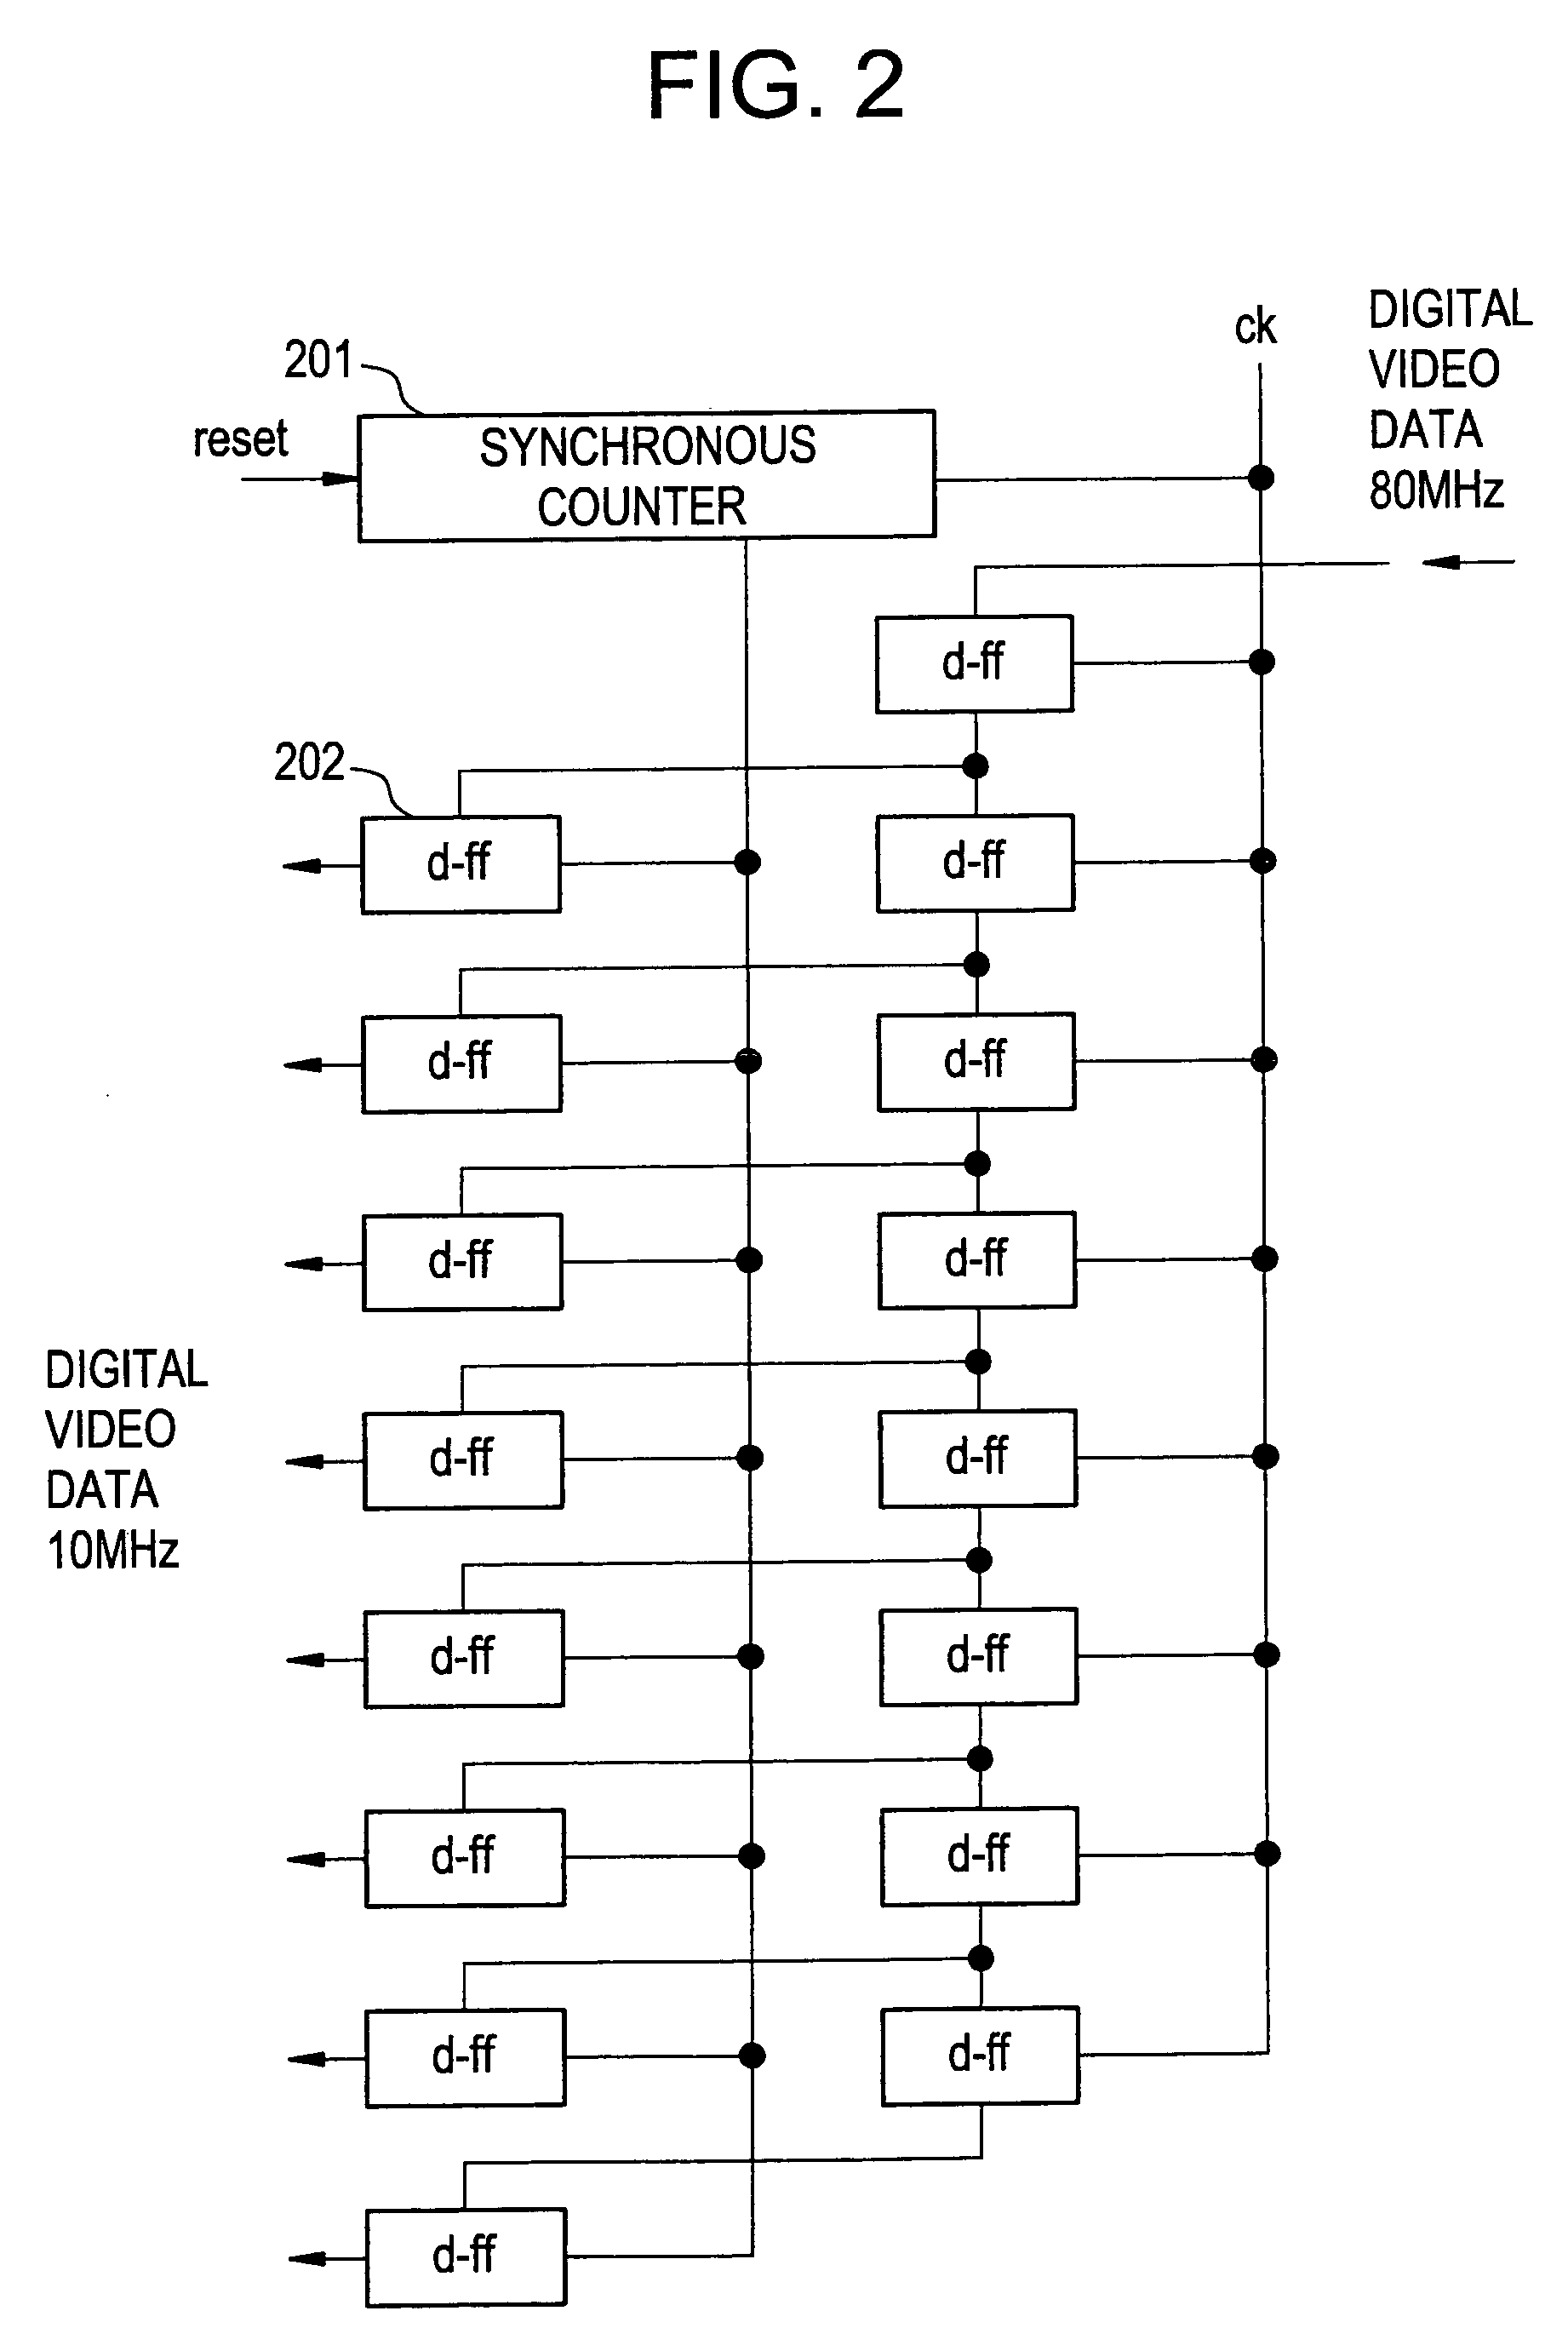 Driving circuit of a semiconductor display device and the semiconductor display device